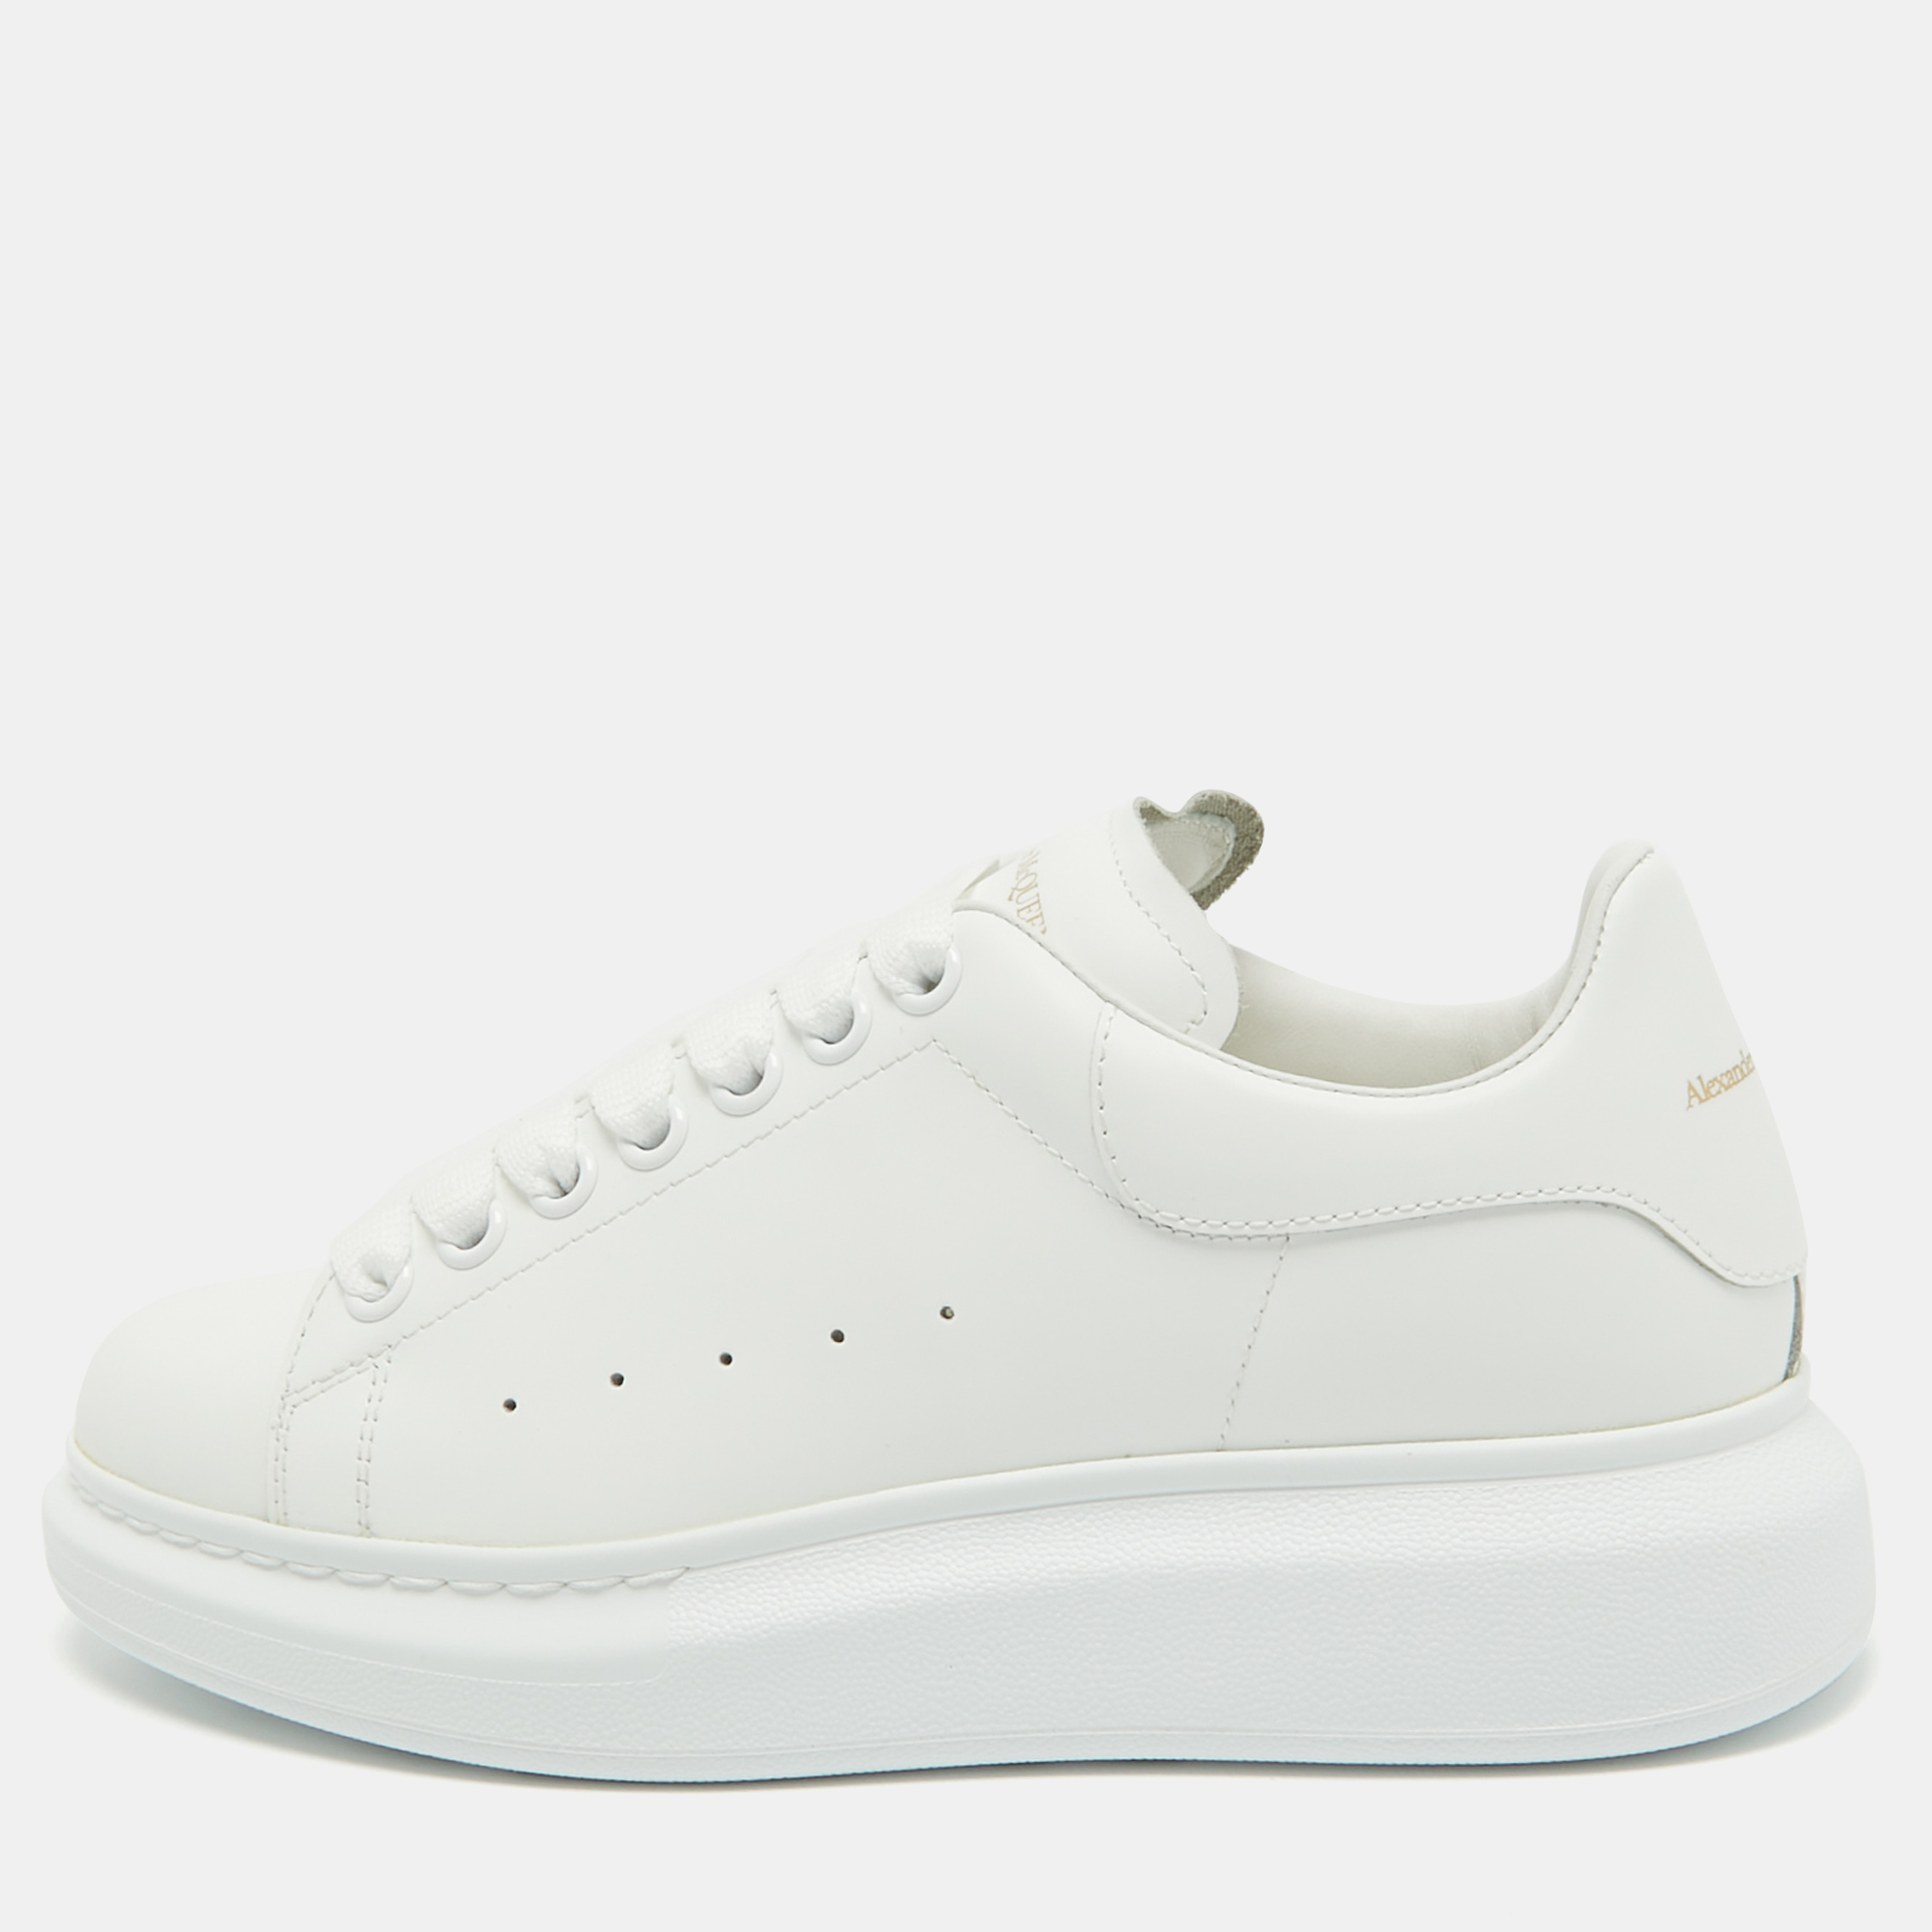 Alexander mcqueen white leather larry sneakers size 38